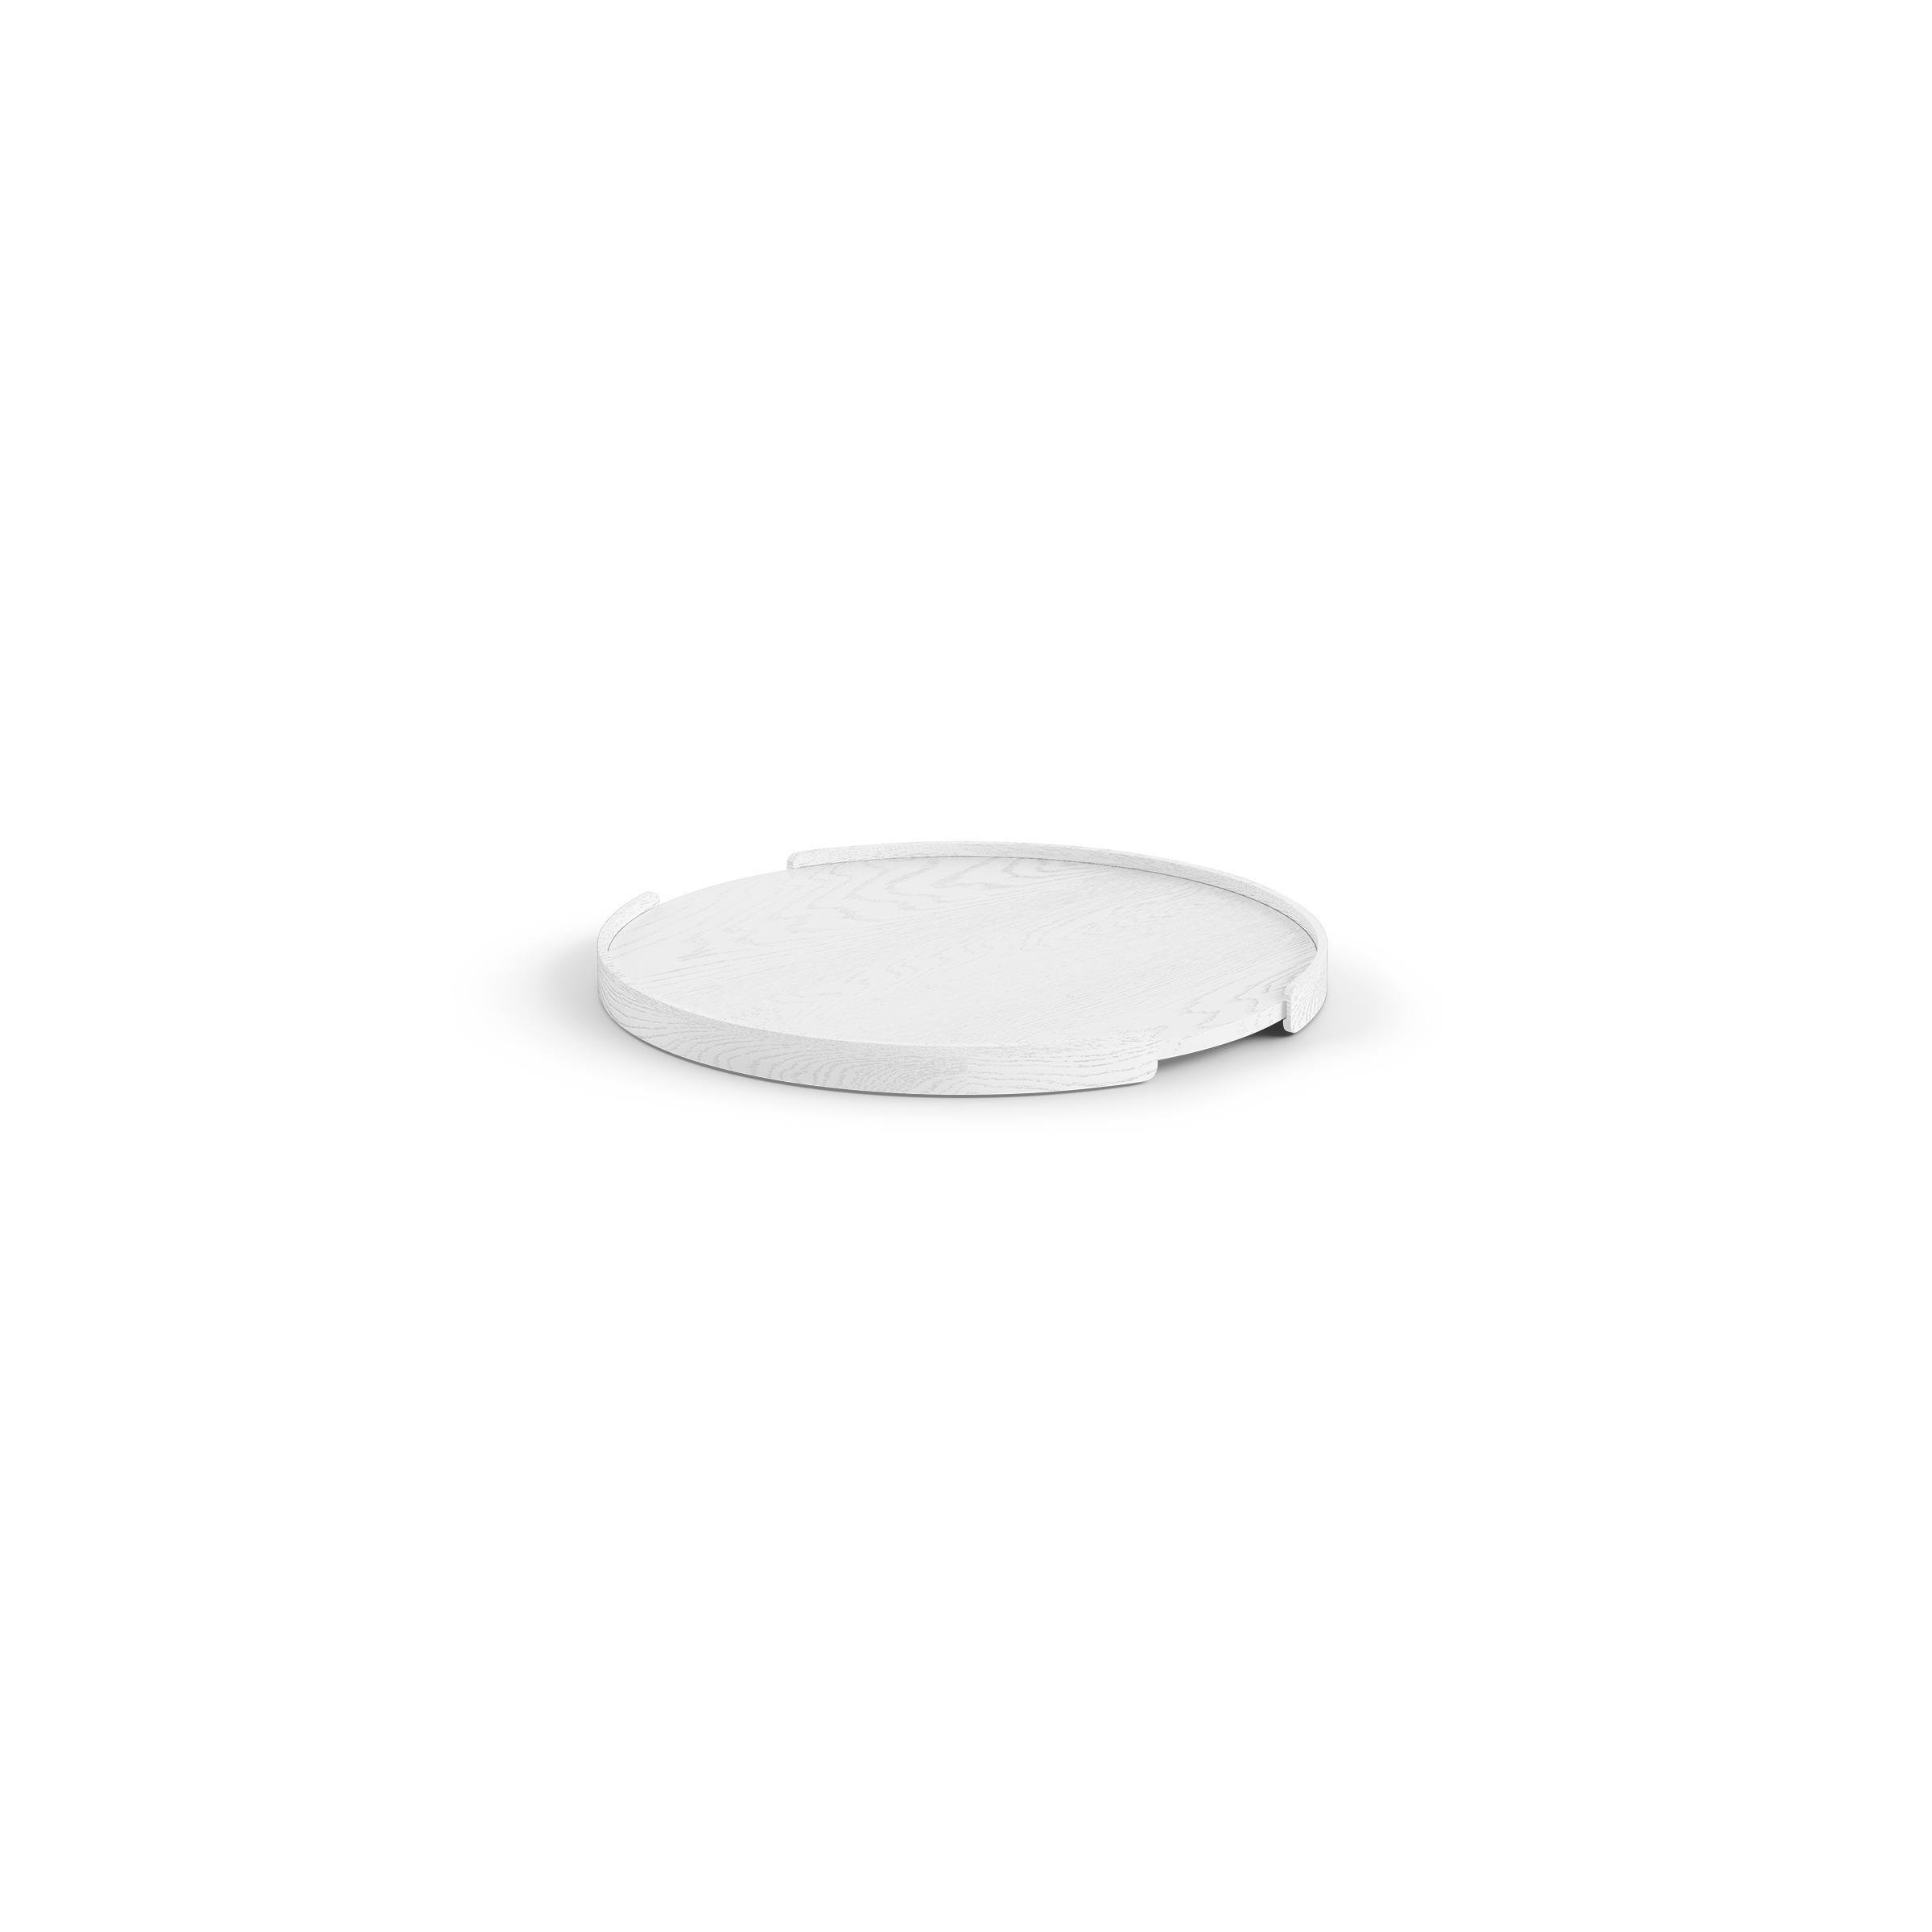 Round Tray in White - Image 0